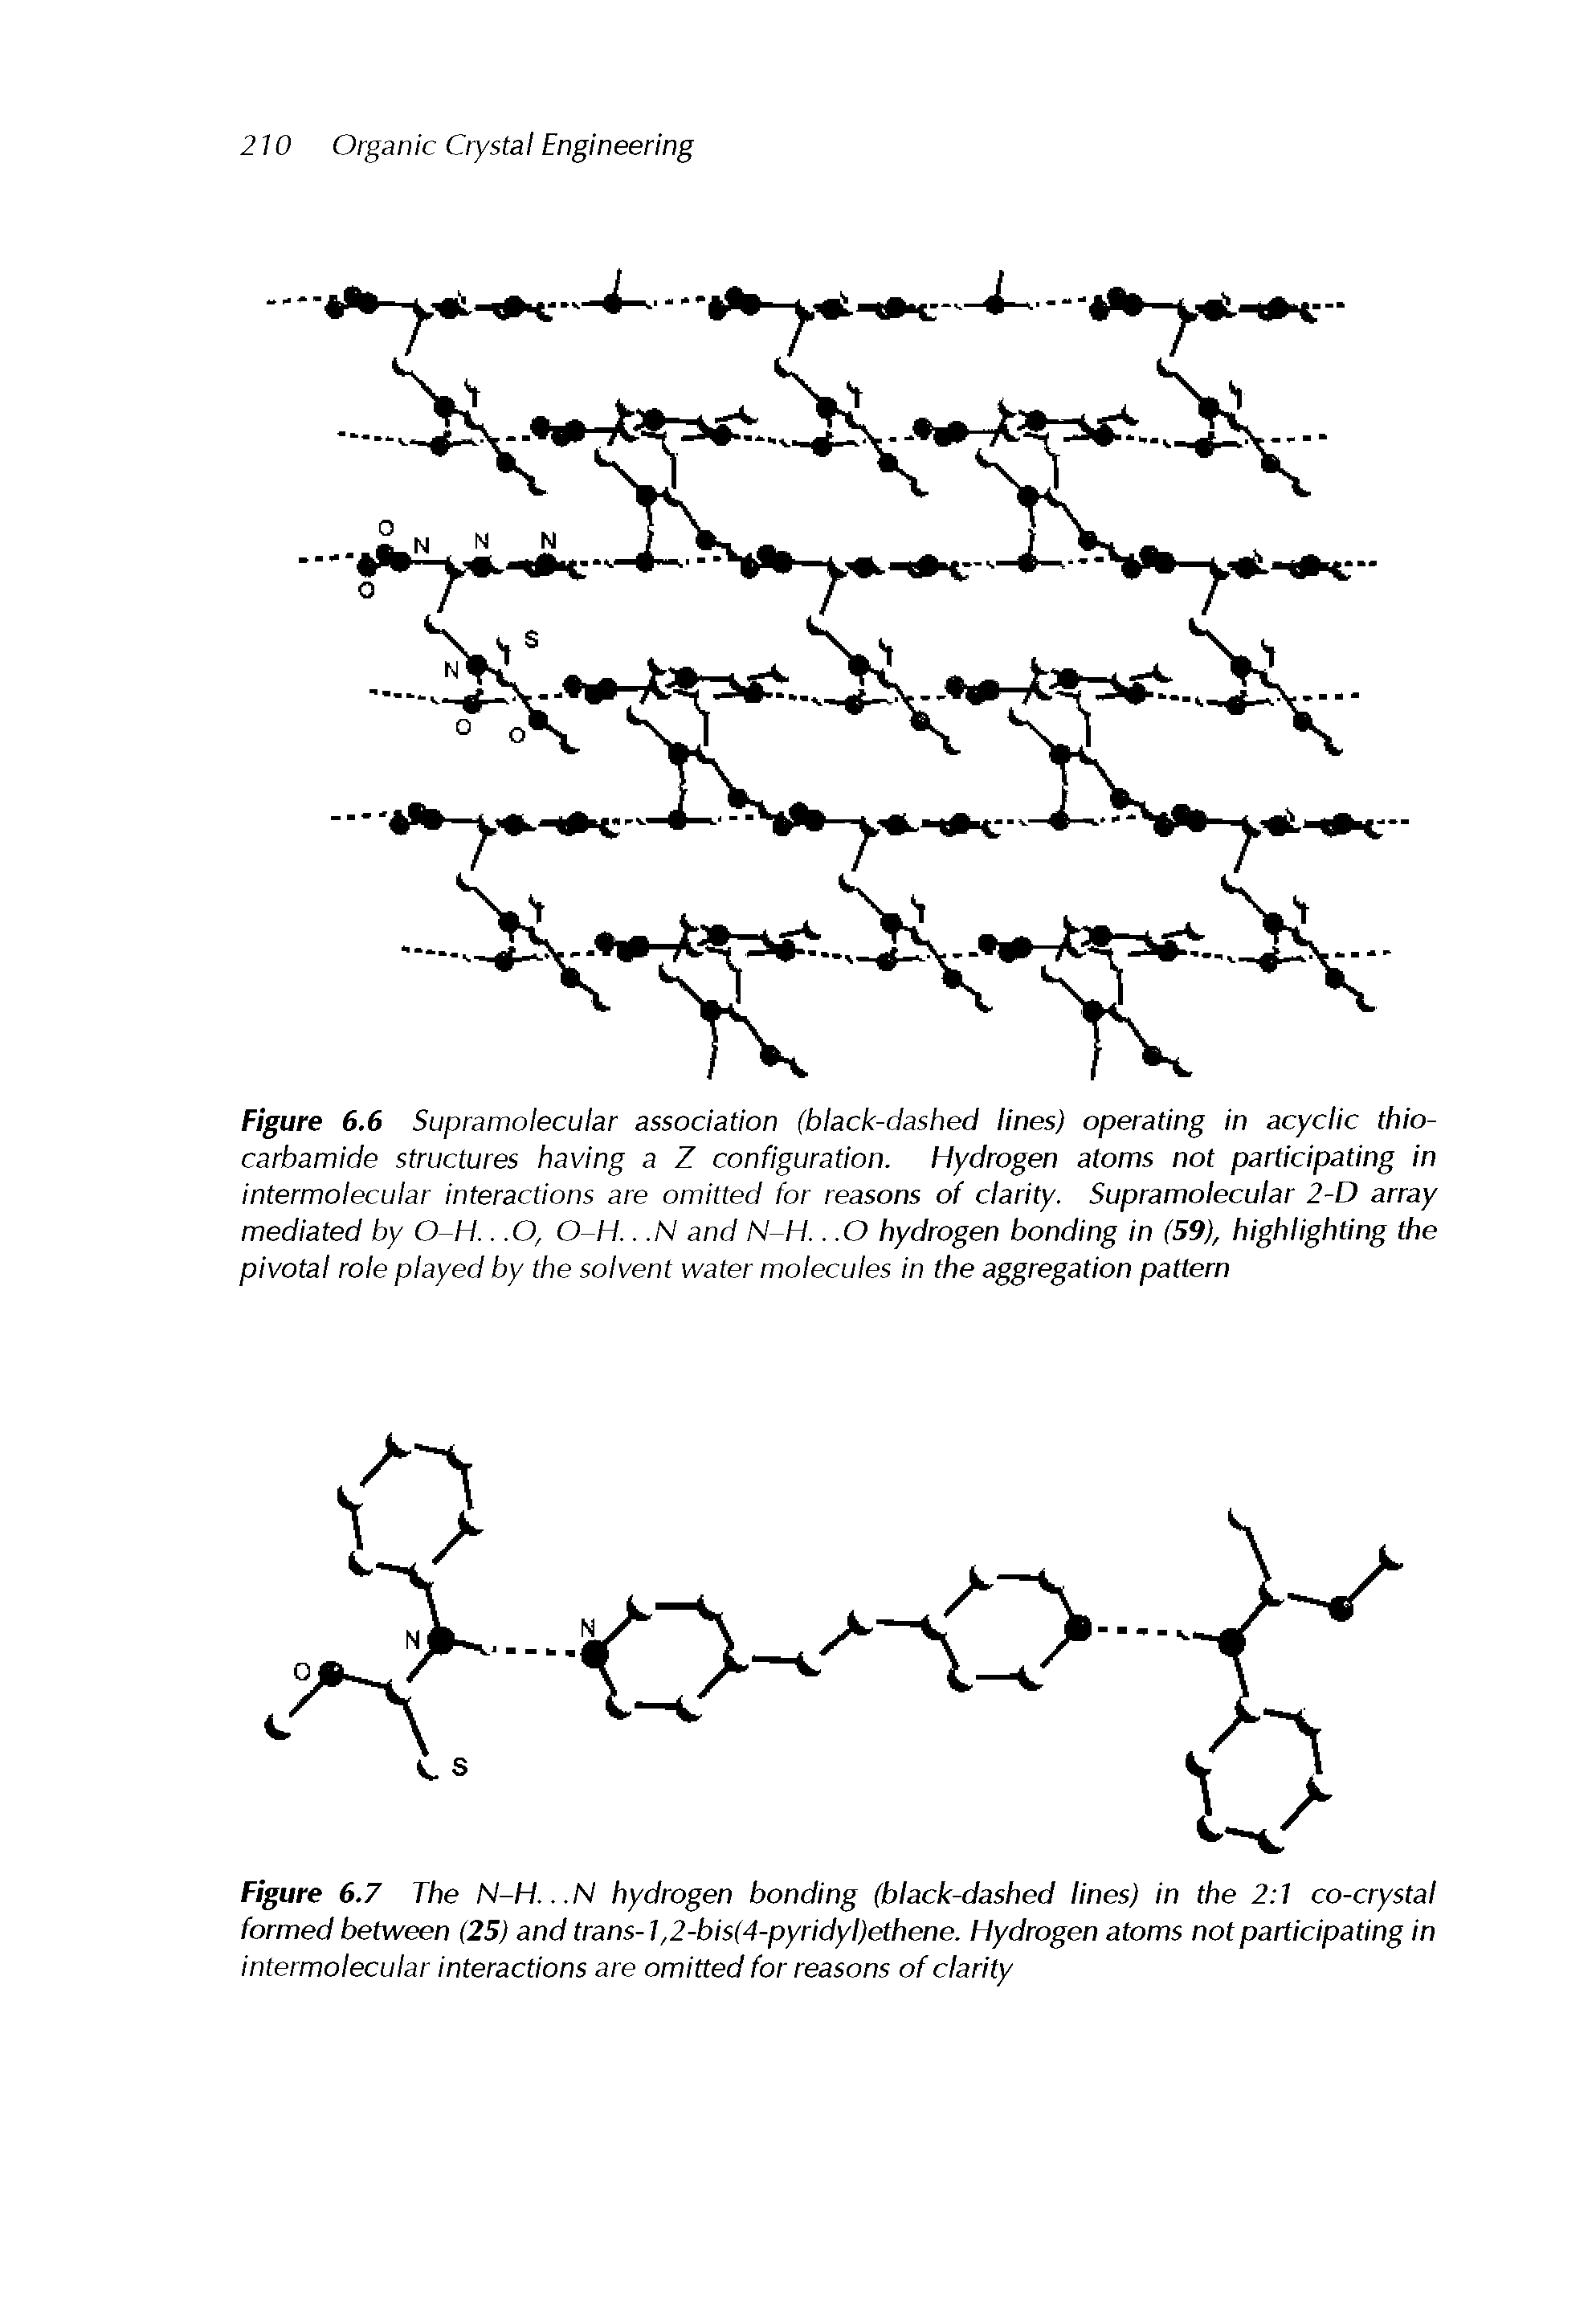 Figure 6.6 Supramolecular association (black-dashed lines) operating in acyclic thio-carbamide structures having a Z configuration. Hydrogen atoms not participating in intermolecular interactions are omitted for reasons of clarity. Supramolecular 2-D array mediated by O-H... O, O-H... N and N-H... O hydrogen bonding in (59), highlighting the pivotal role played by the solvent water molecules in the aggregation pattern...